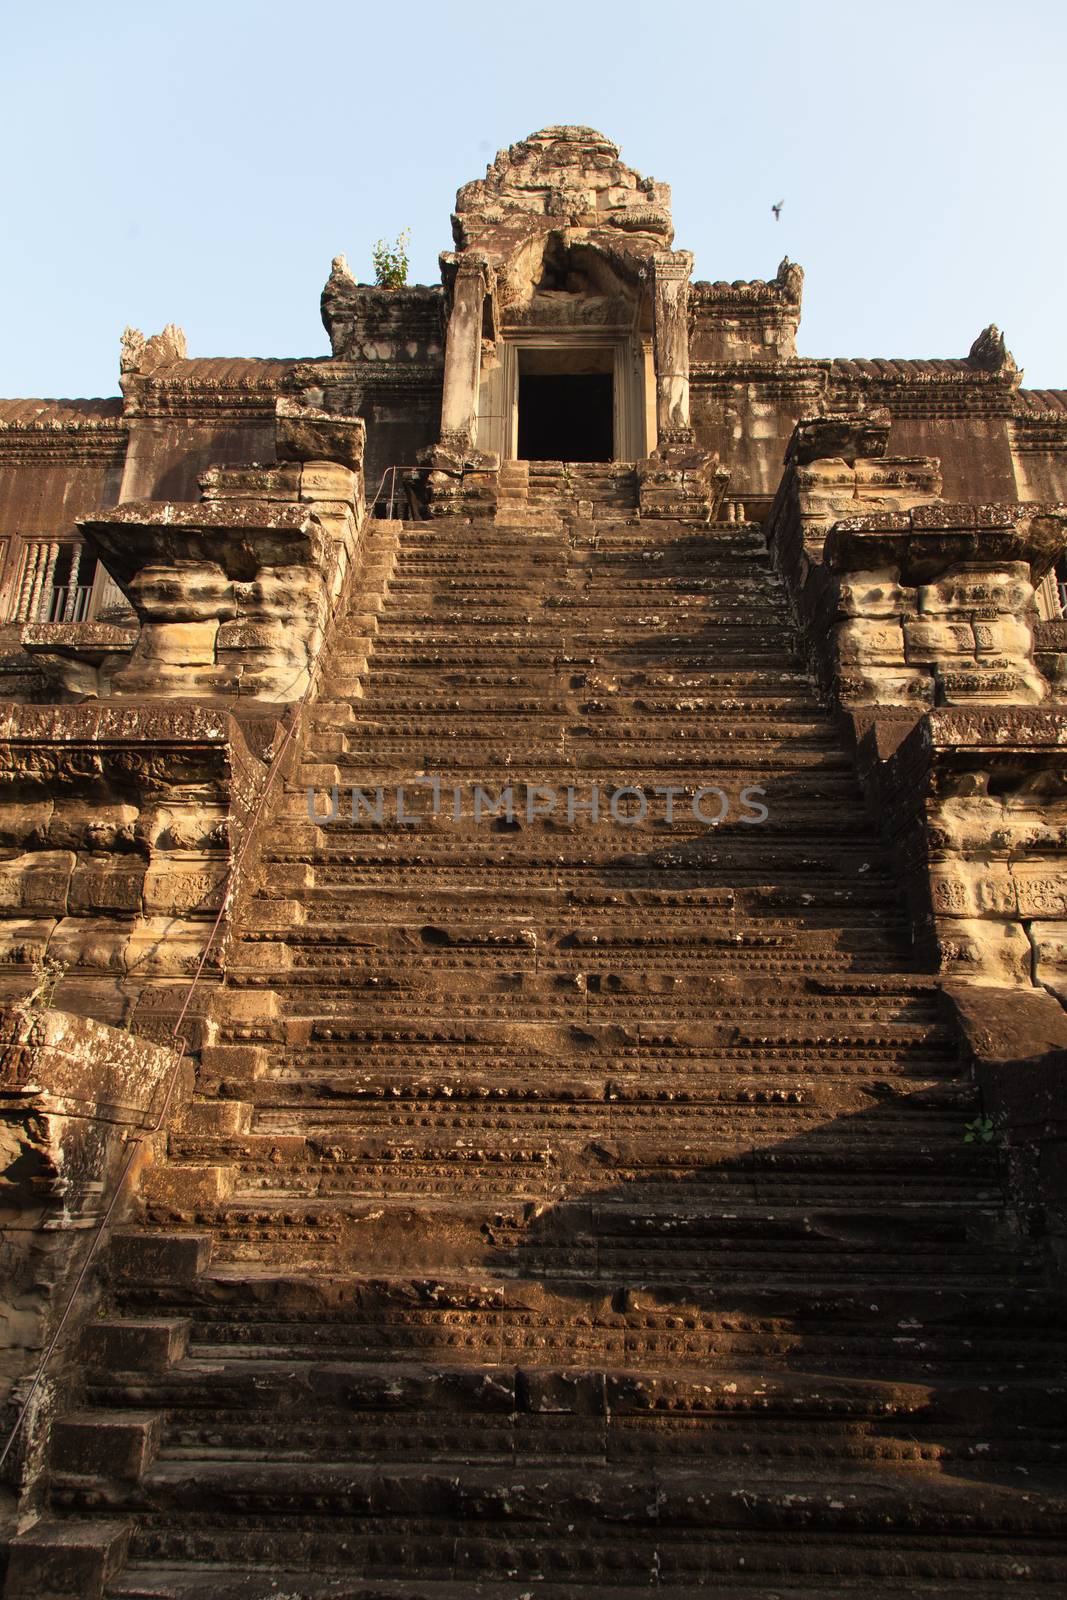 The temple complex of Angkor Watt, Cambodia, early morning sun looking at towers by kgboxford